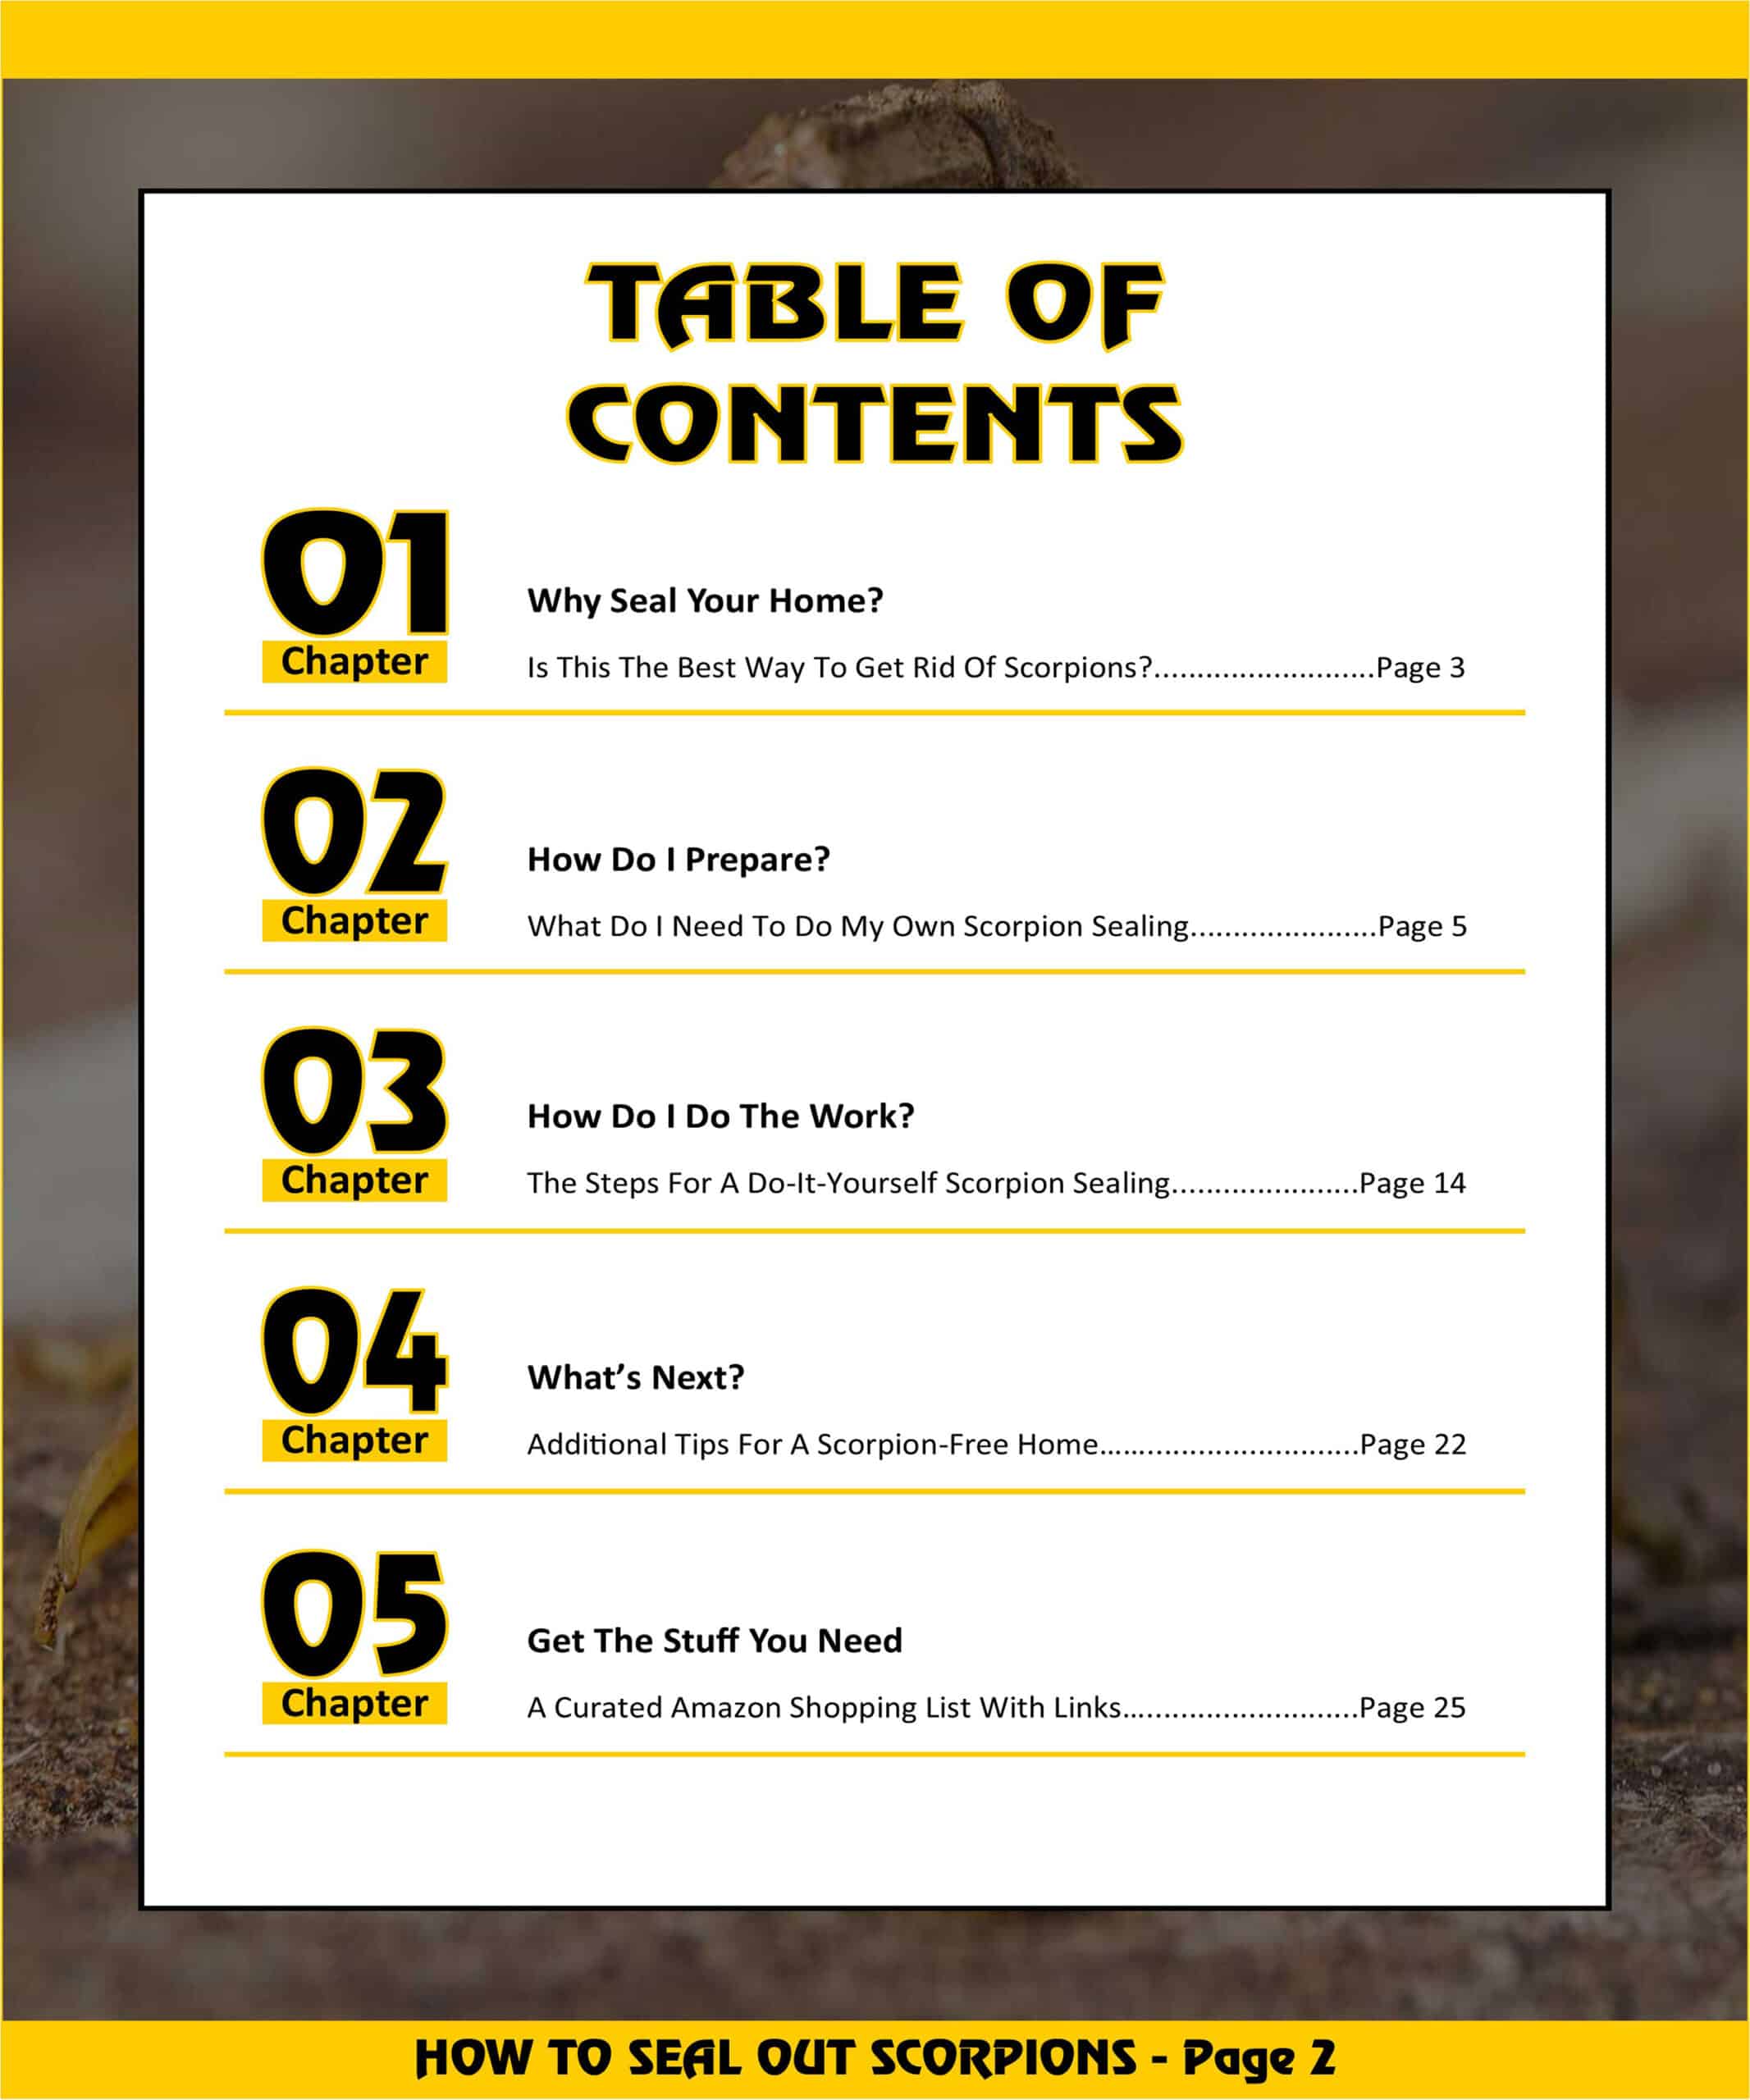 How To Seal Out Scorpions E-Book v2 Contents Excerpt